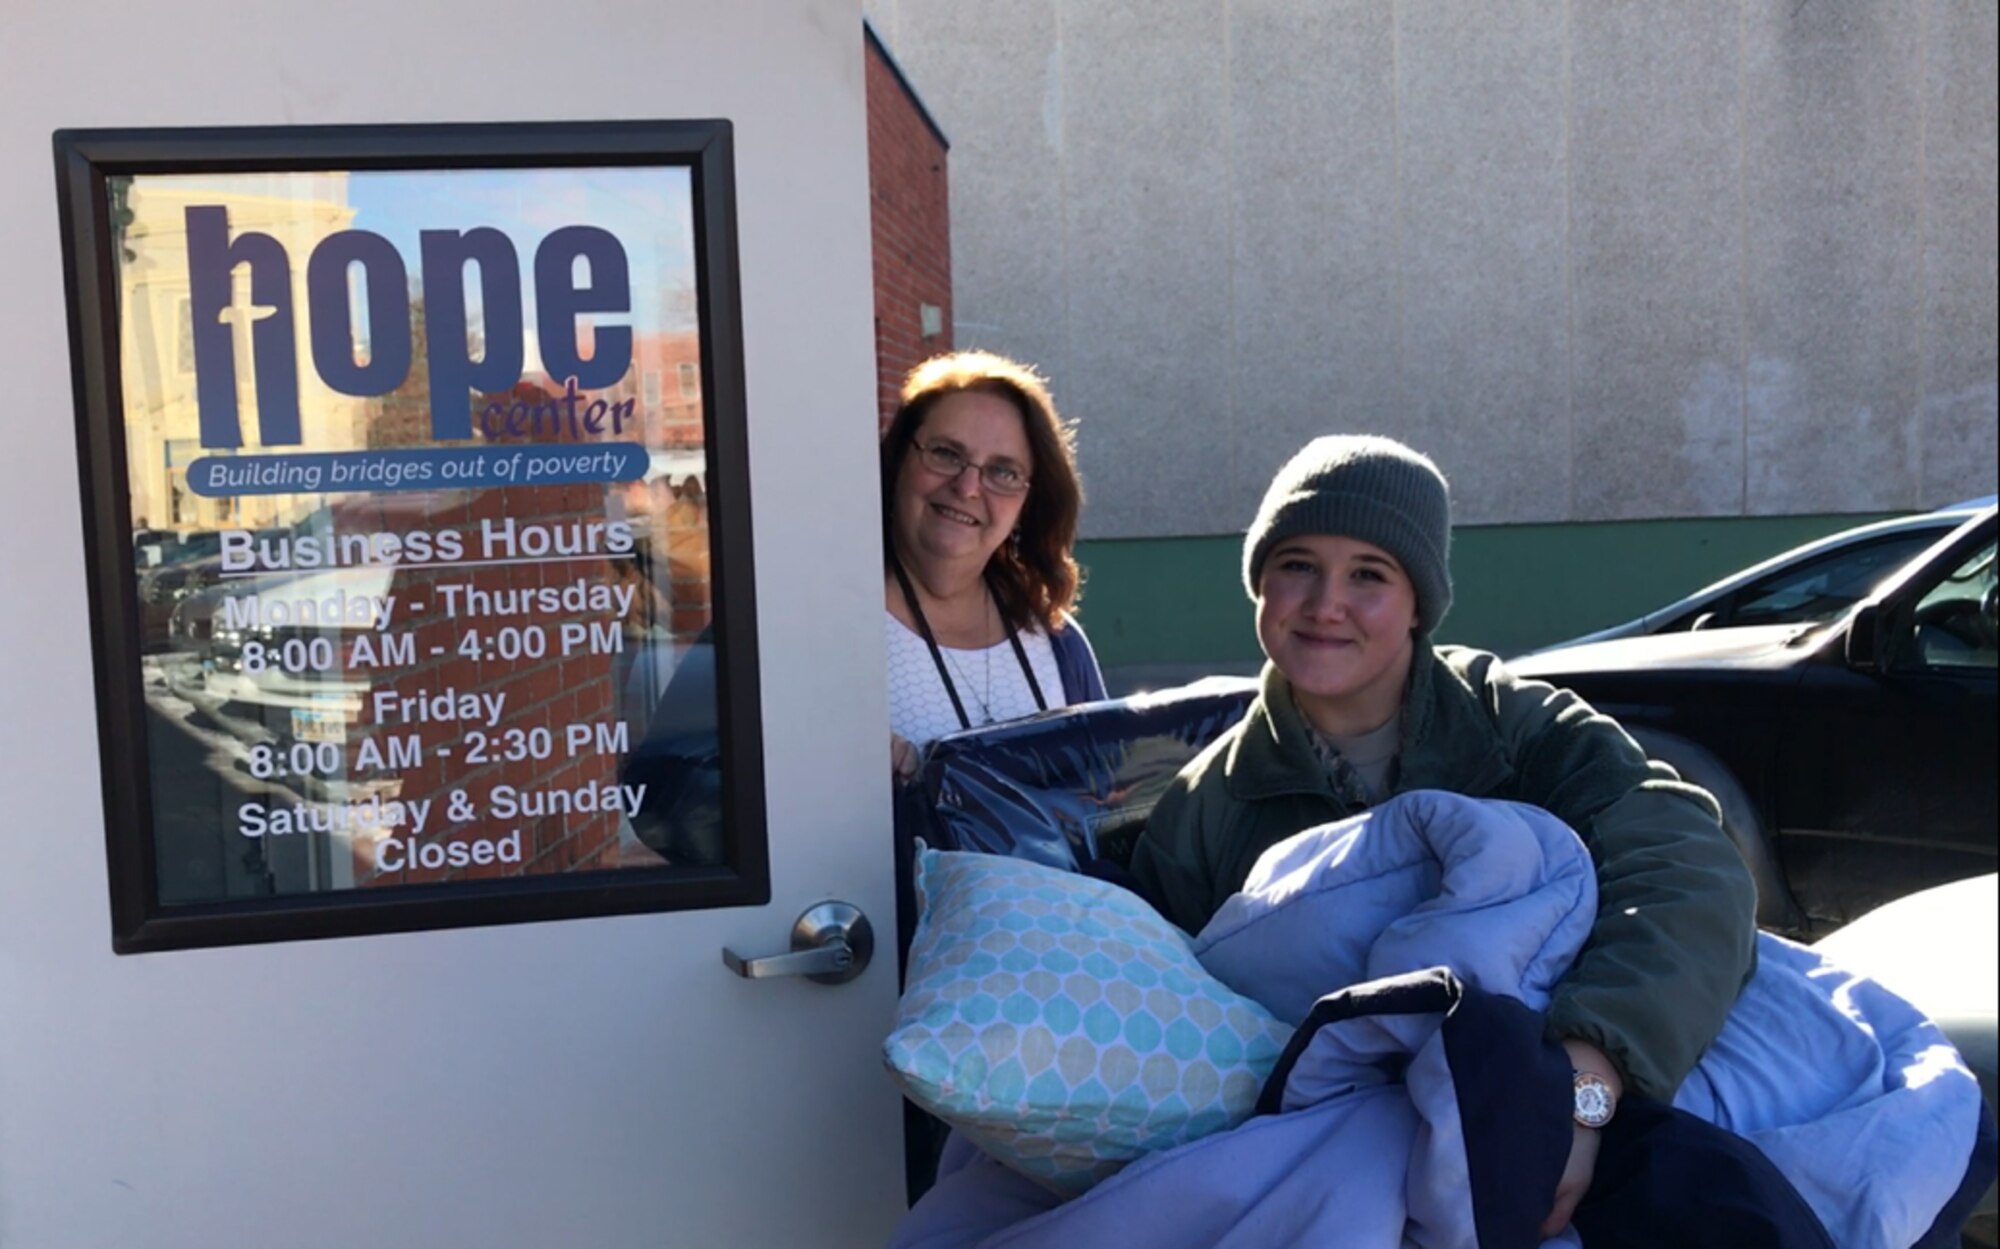 Airman 1st Class Katelin Offutt, a mental health technician assigned to the 28th Medical Group, delivers blankets to the Hope Center in Rapid City, S.D., Dec. 19, 2016. More than 100 blankets were donated to both the Hope Center and Cornerstone Rescue Mission to provide the homeless in the community covers for the winter. (Courtesy photo)